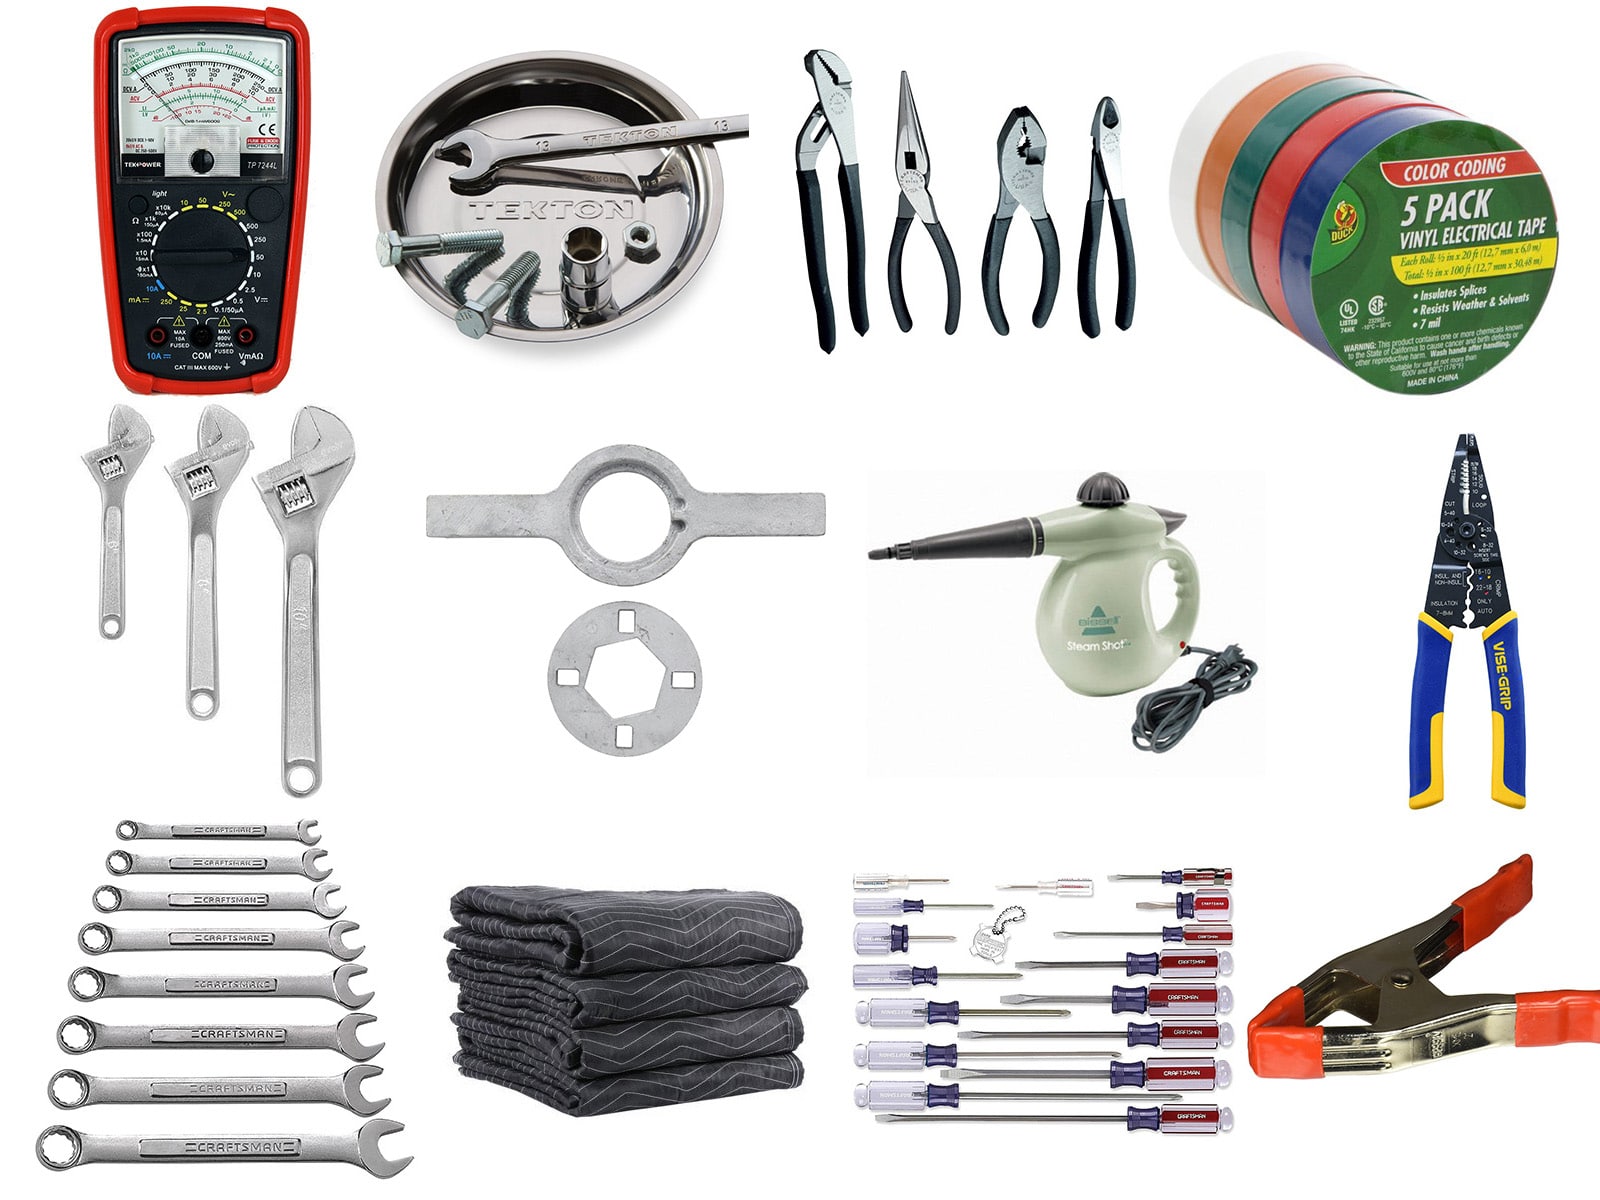 Featured image for “Appliance Repair Tool Box”